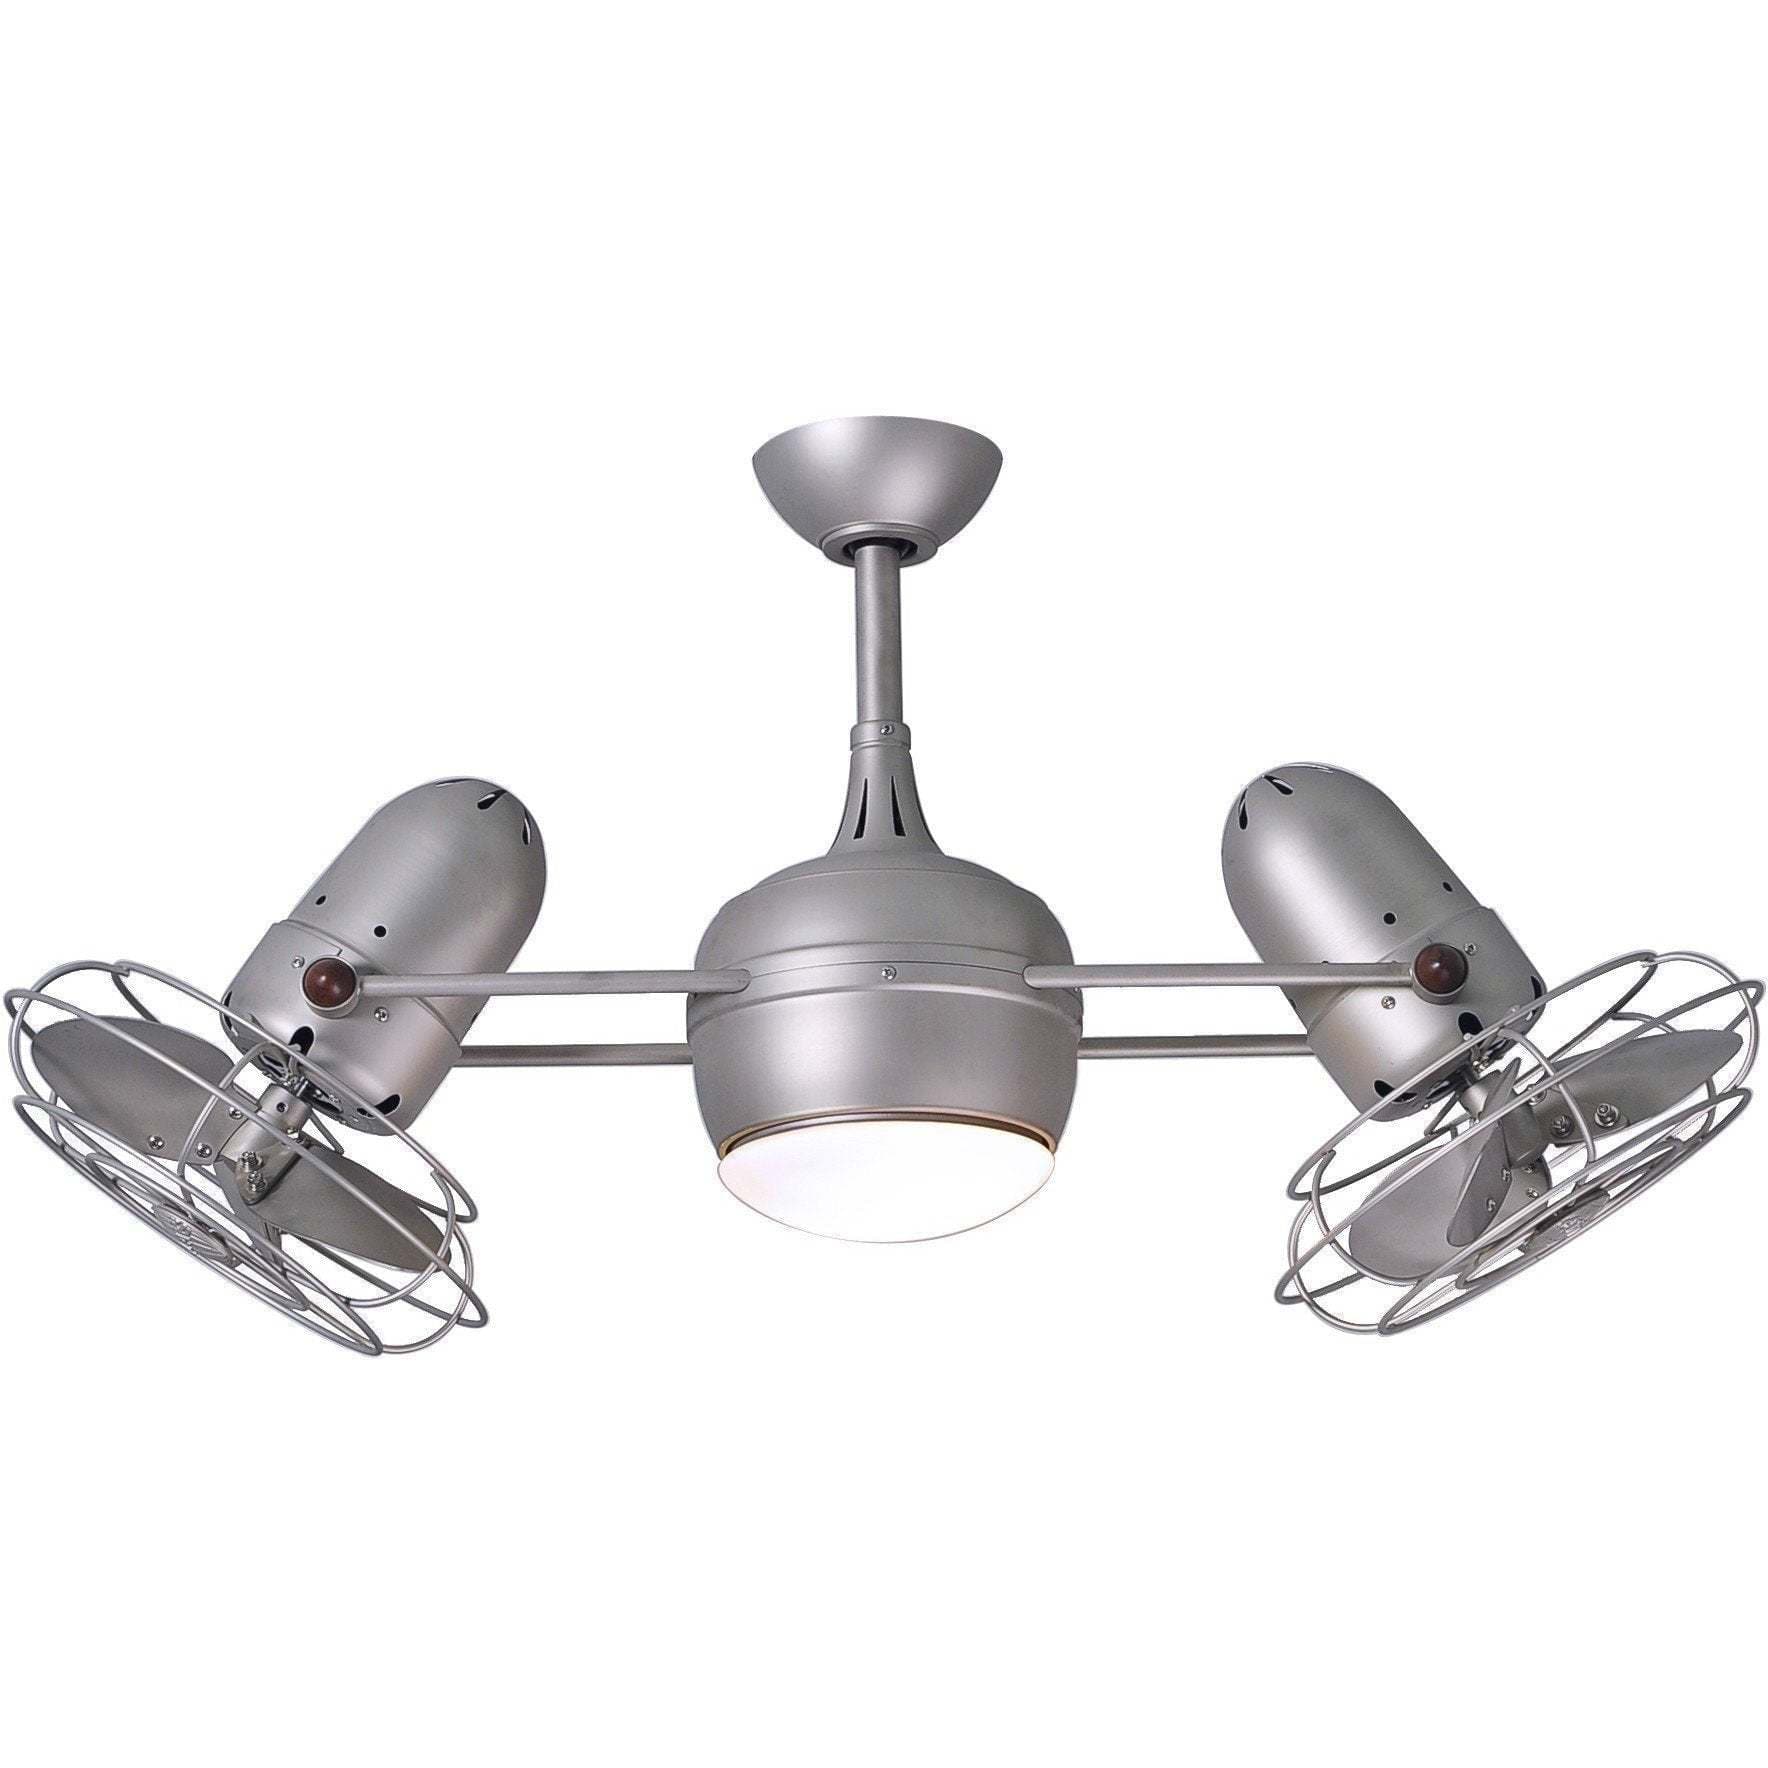 Shown in Brushed Nickel with Metal Blades and Light Kit